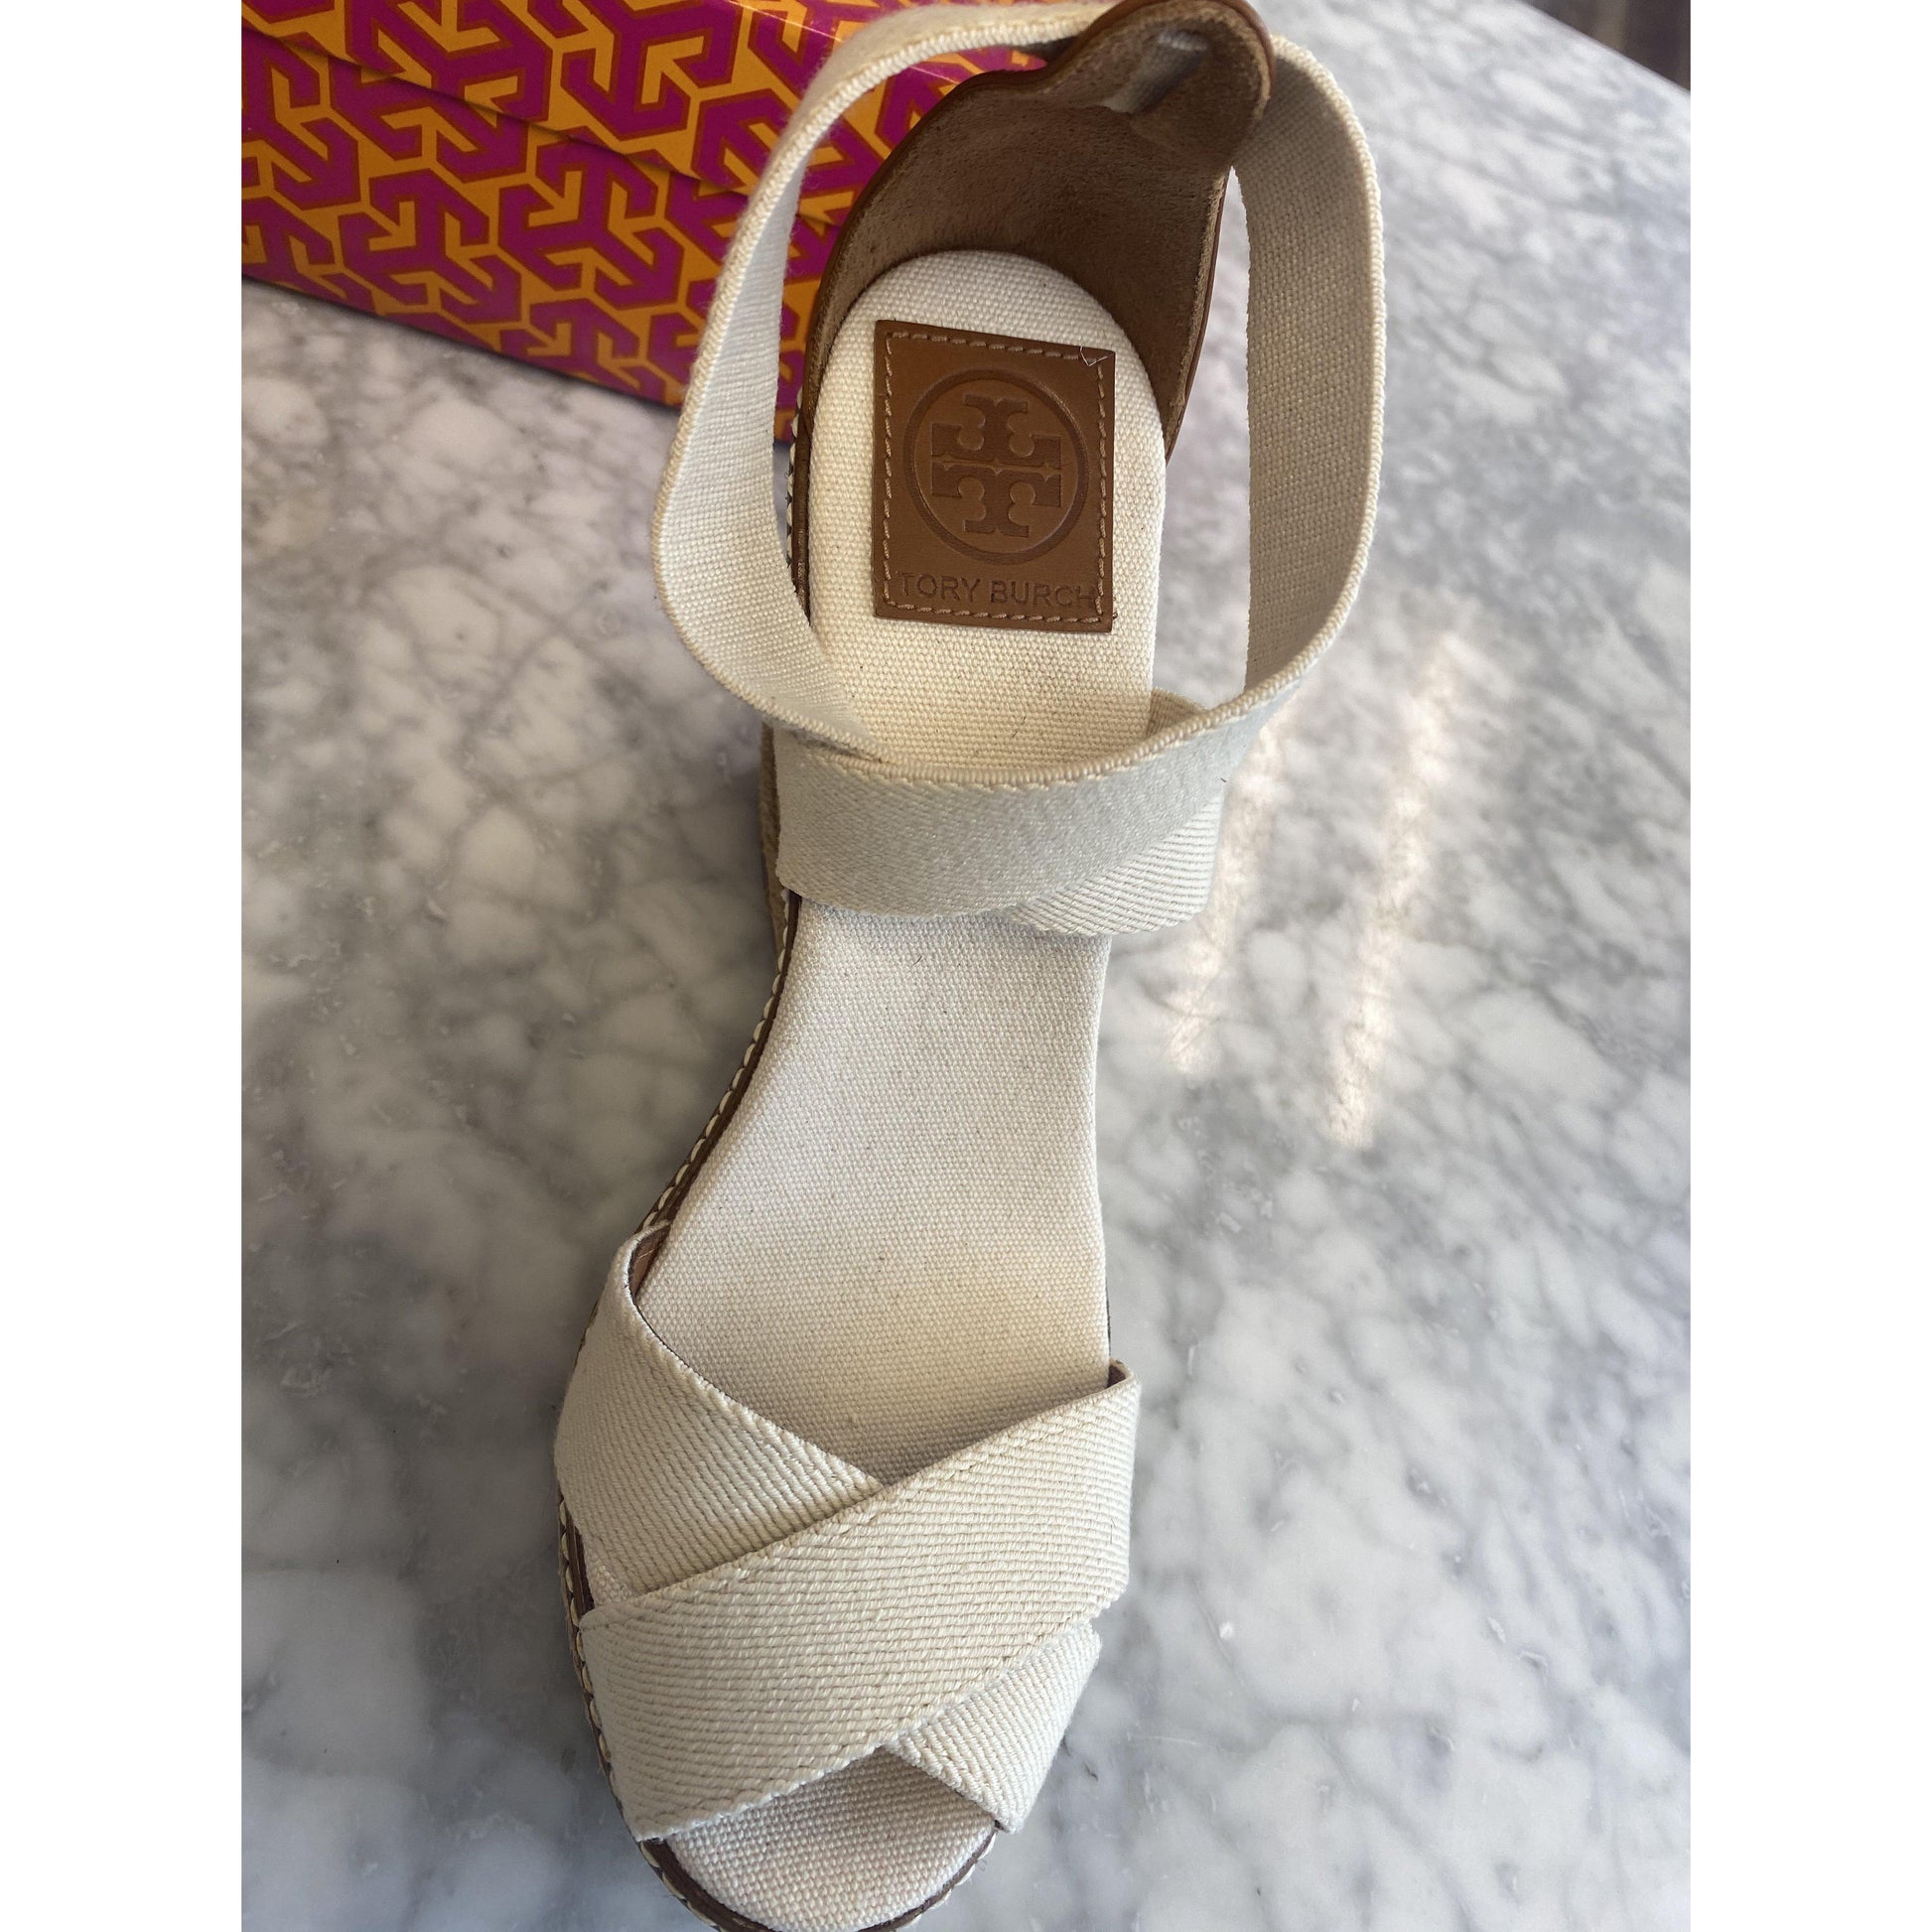 Tory Burch Adonis Espadrille size 9 – Southern Bliss